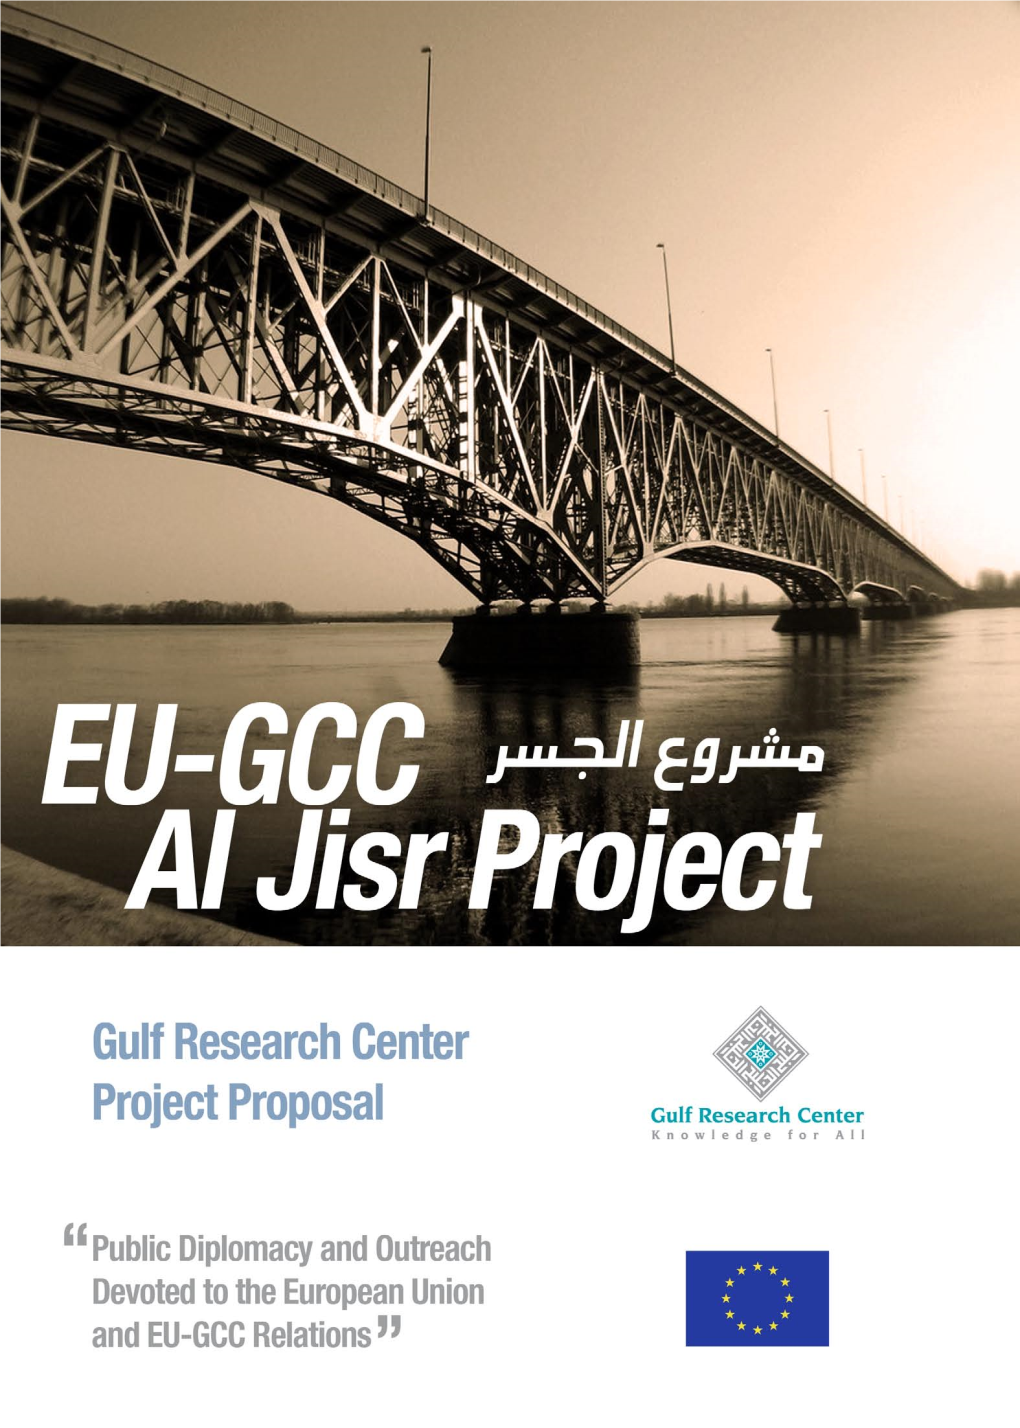 Gulf Research Center Project Proposal